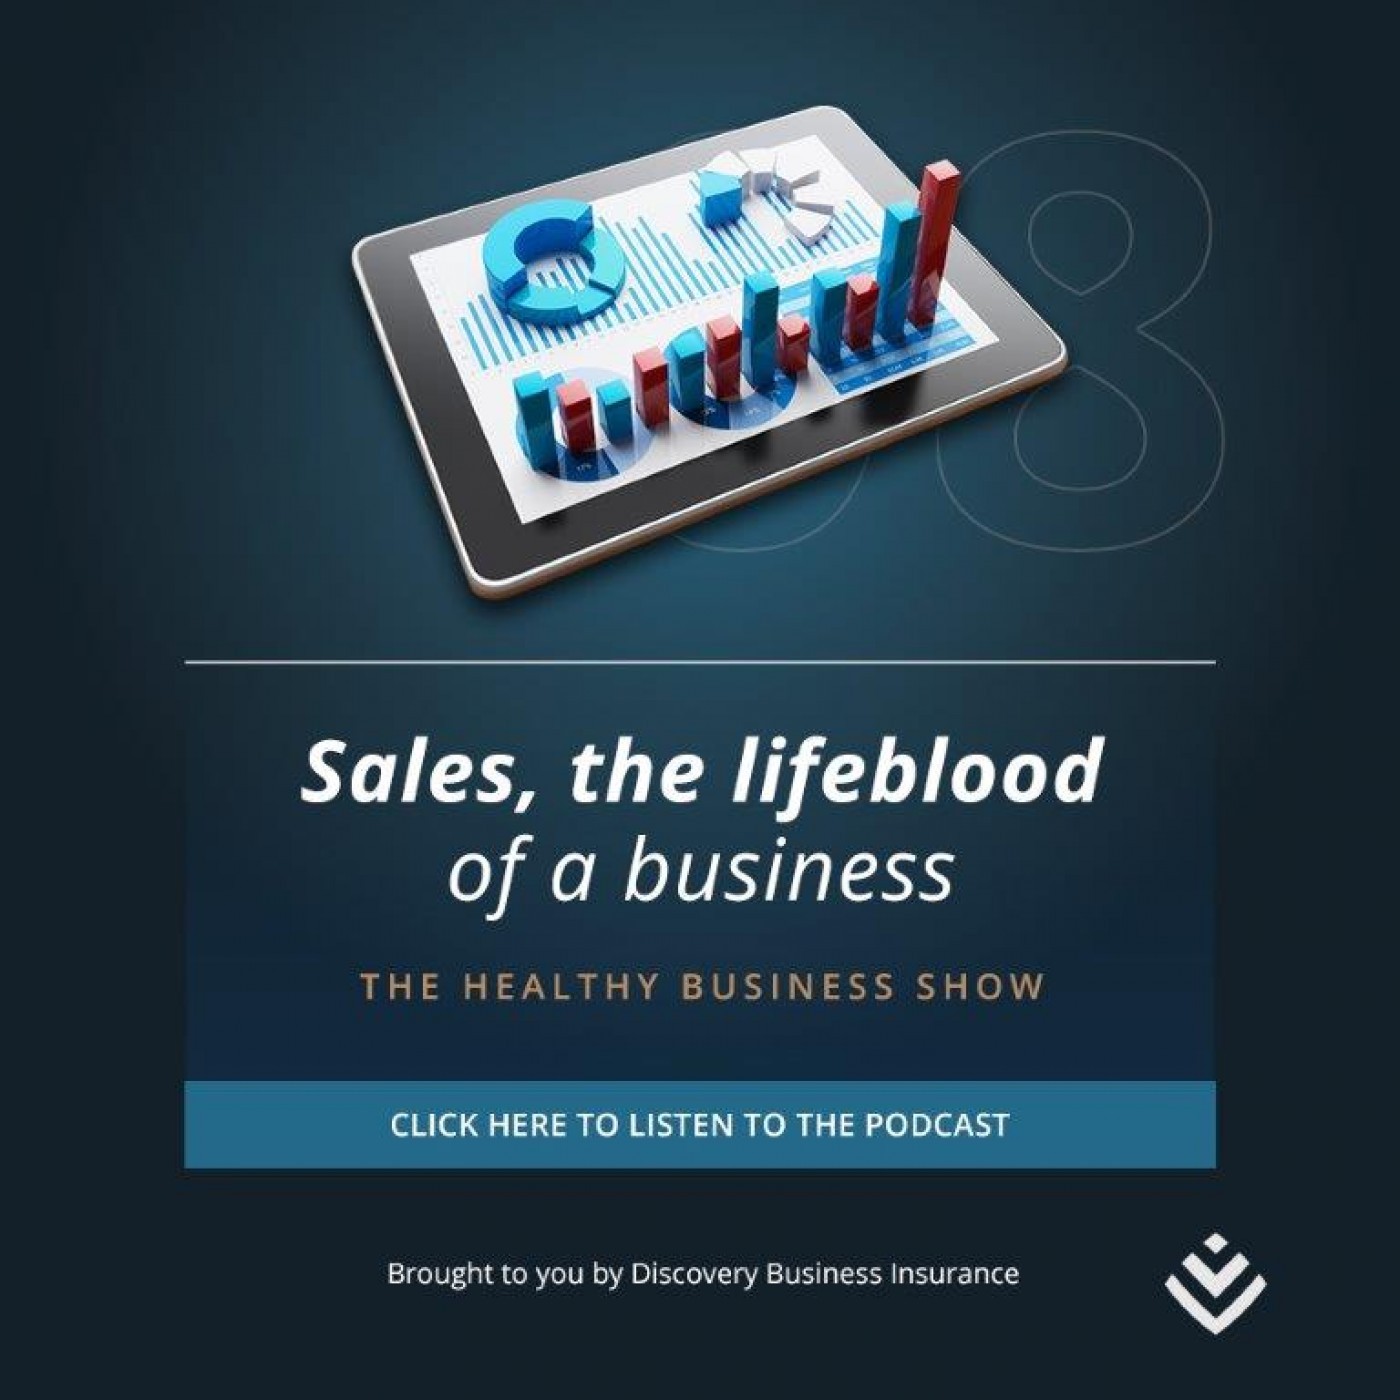 The Heathy Business Show: Sales, the lifeblood of a business